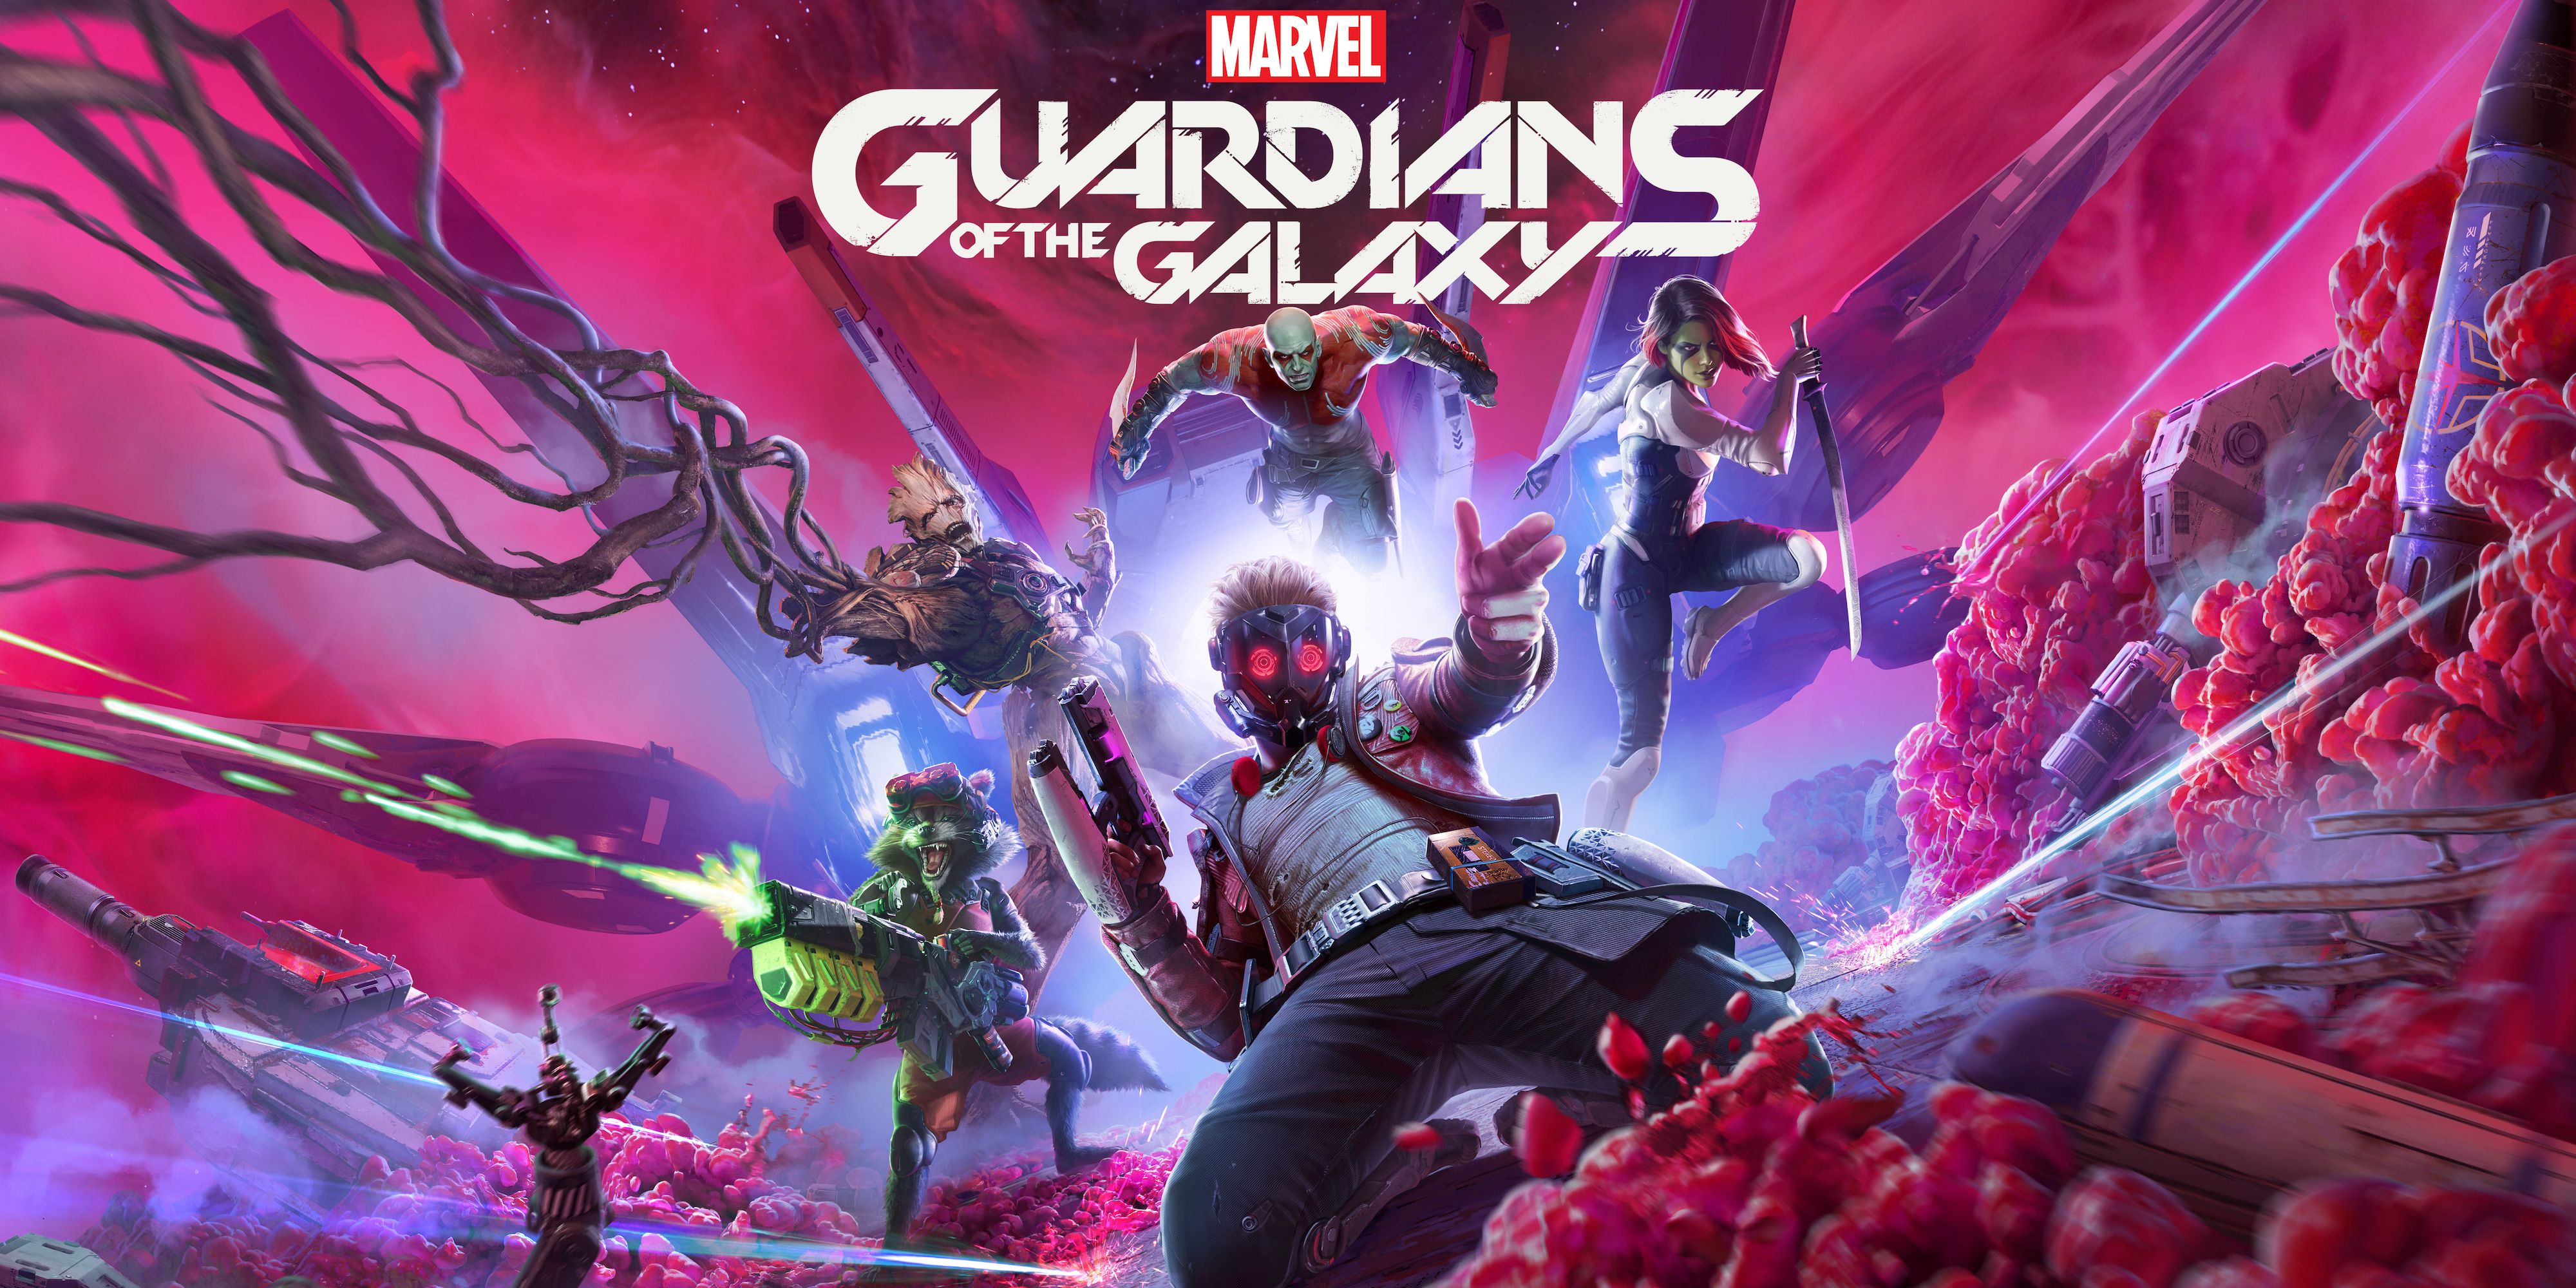 Guardians Of The Galaxy Game Release Date Revealed For Fall 2021